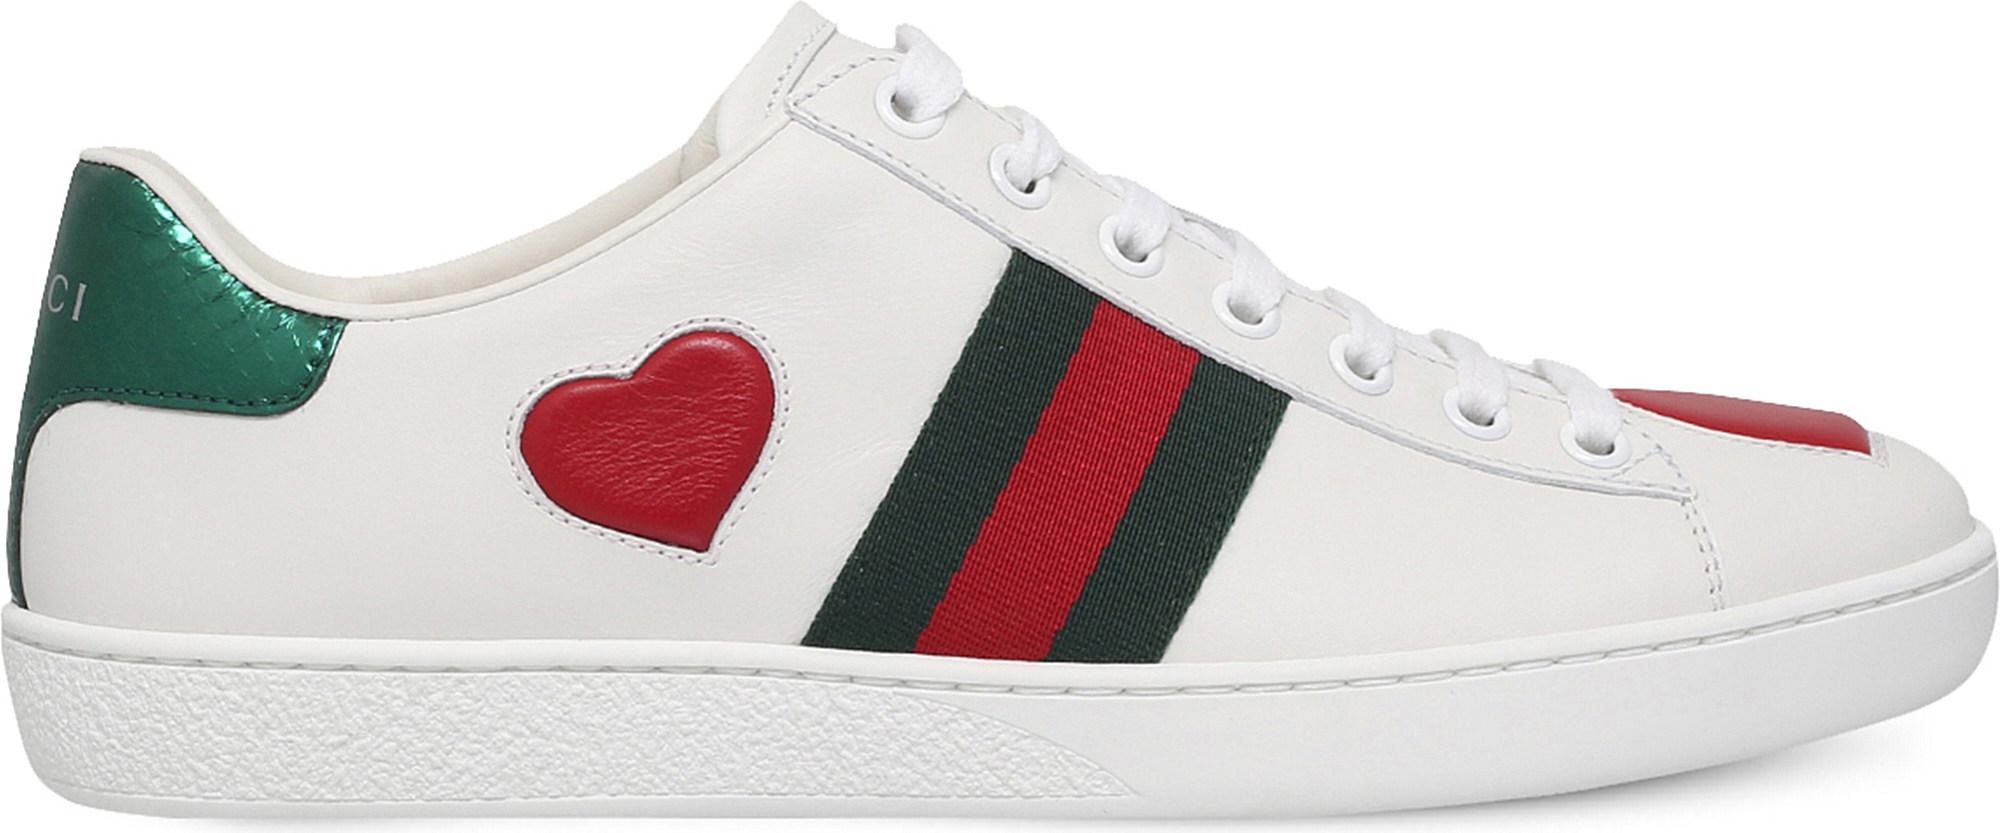 Lyst - Gucci New Ace Heart-detail Leather Trainers - Save 12%